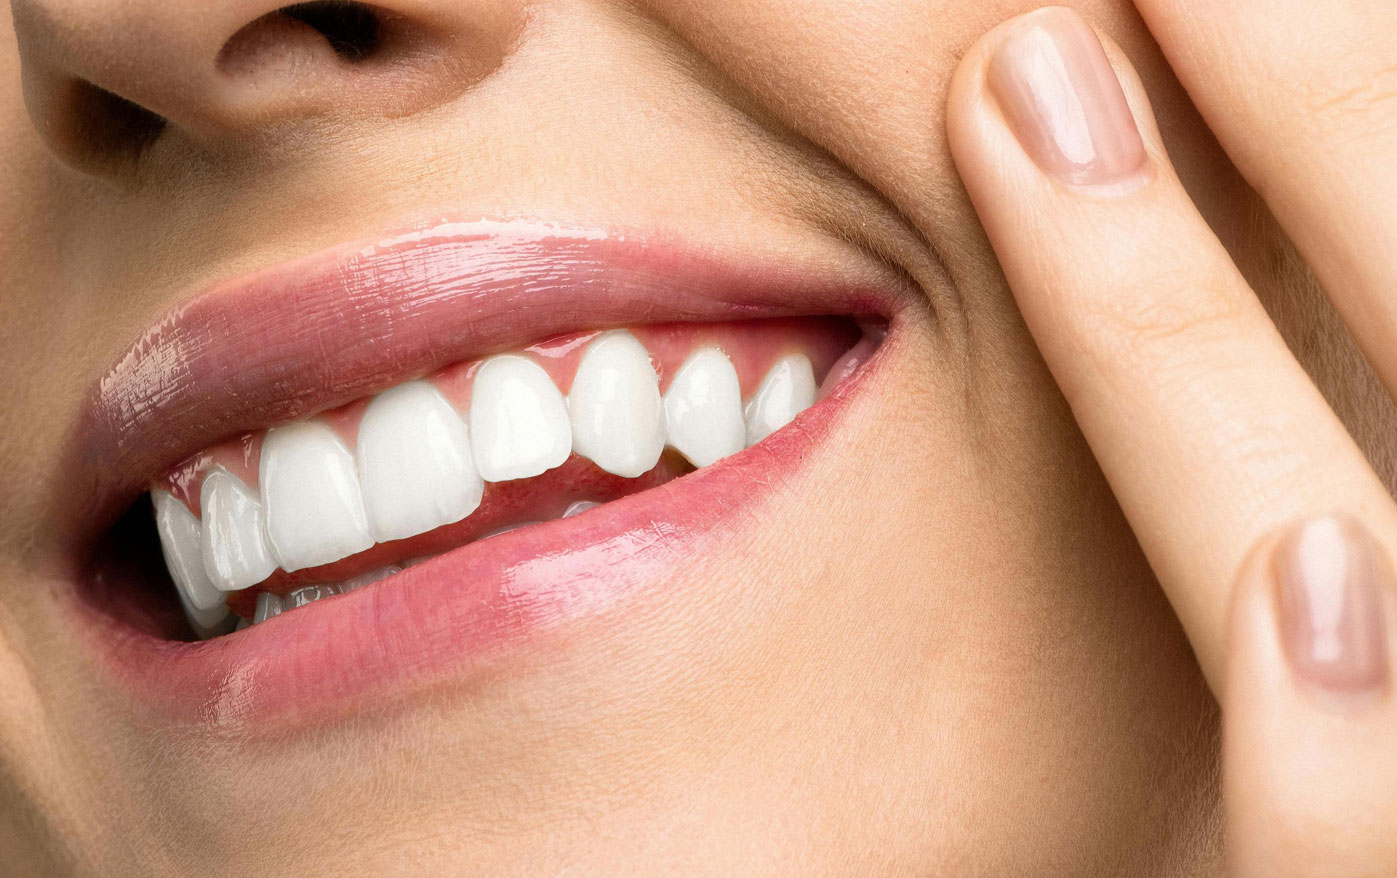 Smile With Confidence With Zoom Teeth Whitening